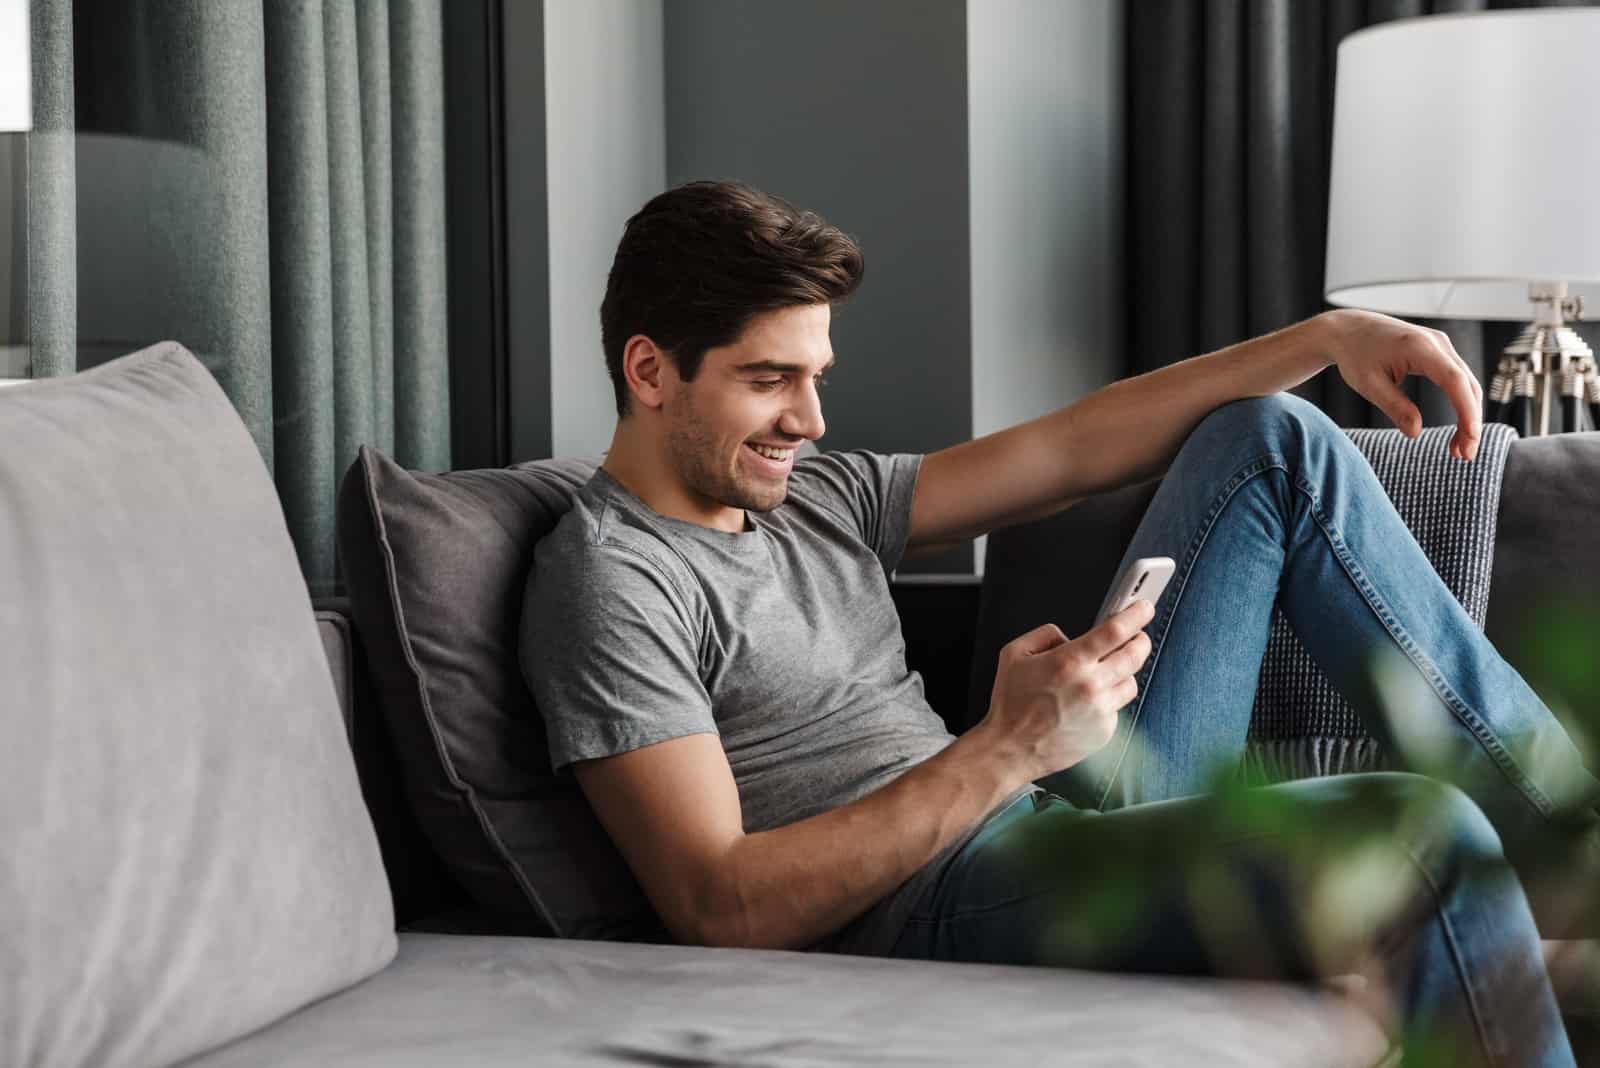 a man sits on the couch and a button on the phone